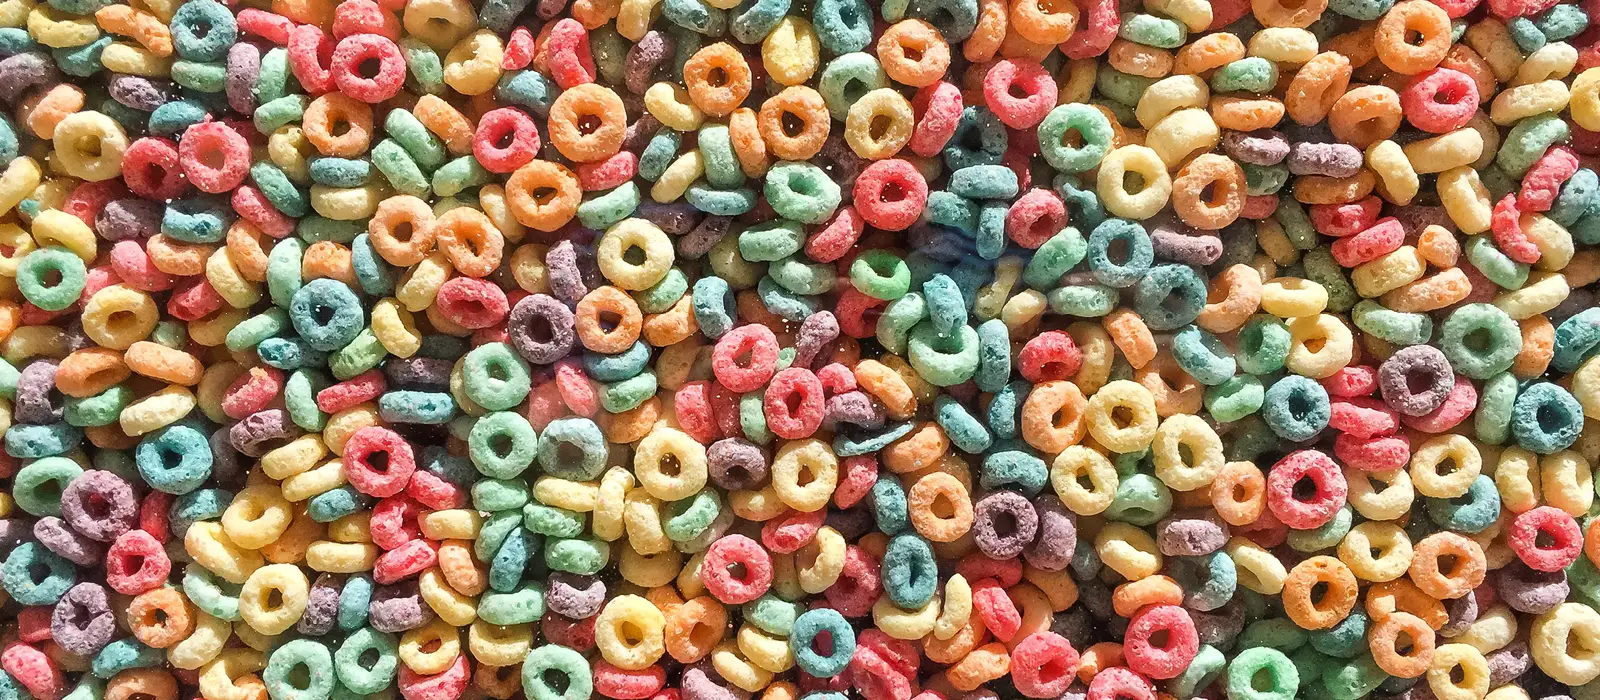 Ring-shaped, fruit flavoured sugary cereal